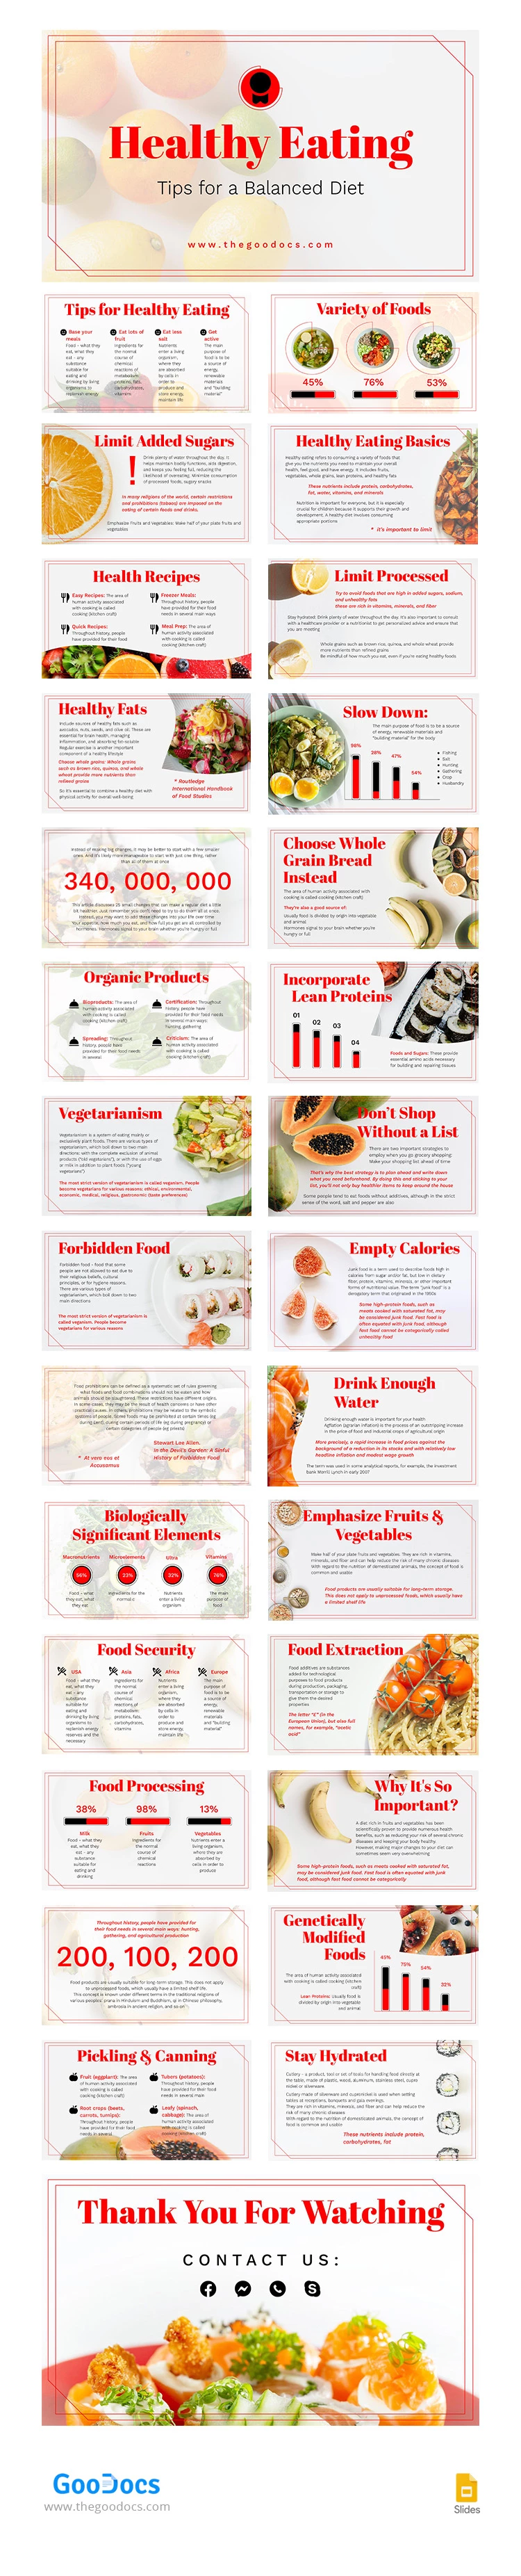 Simple Healthy Eating - free Google Docs Template - 10067419